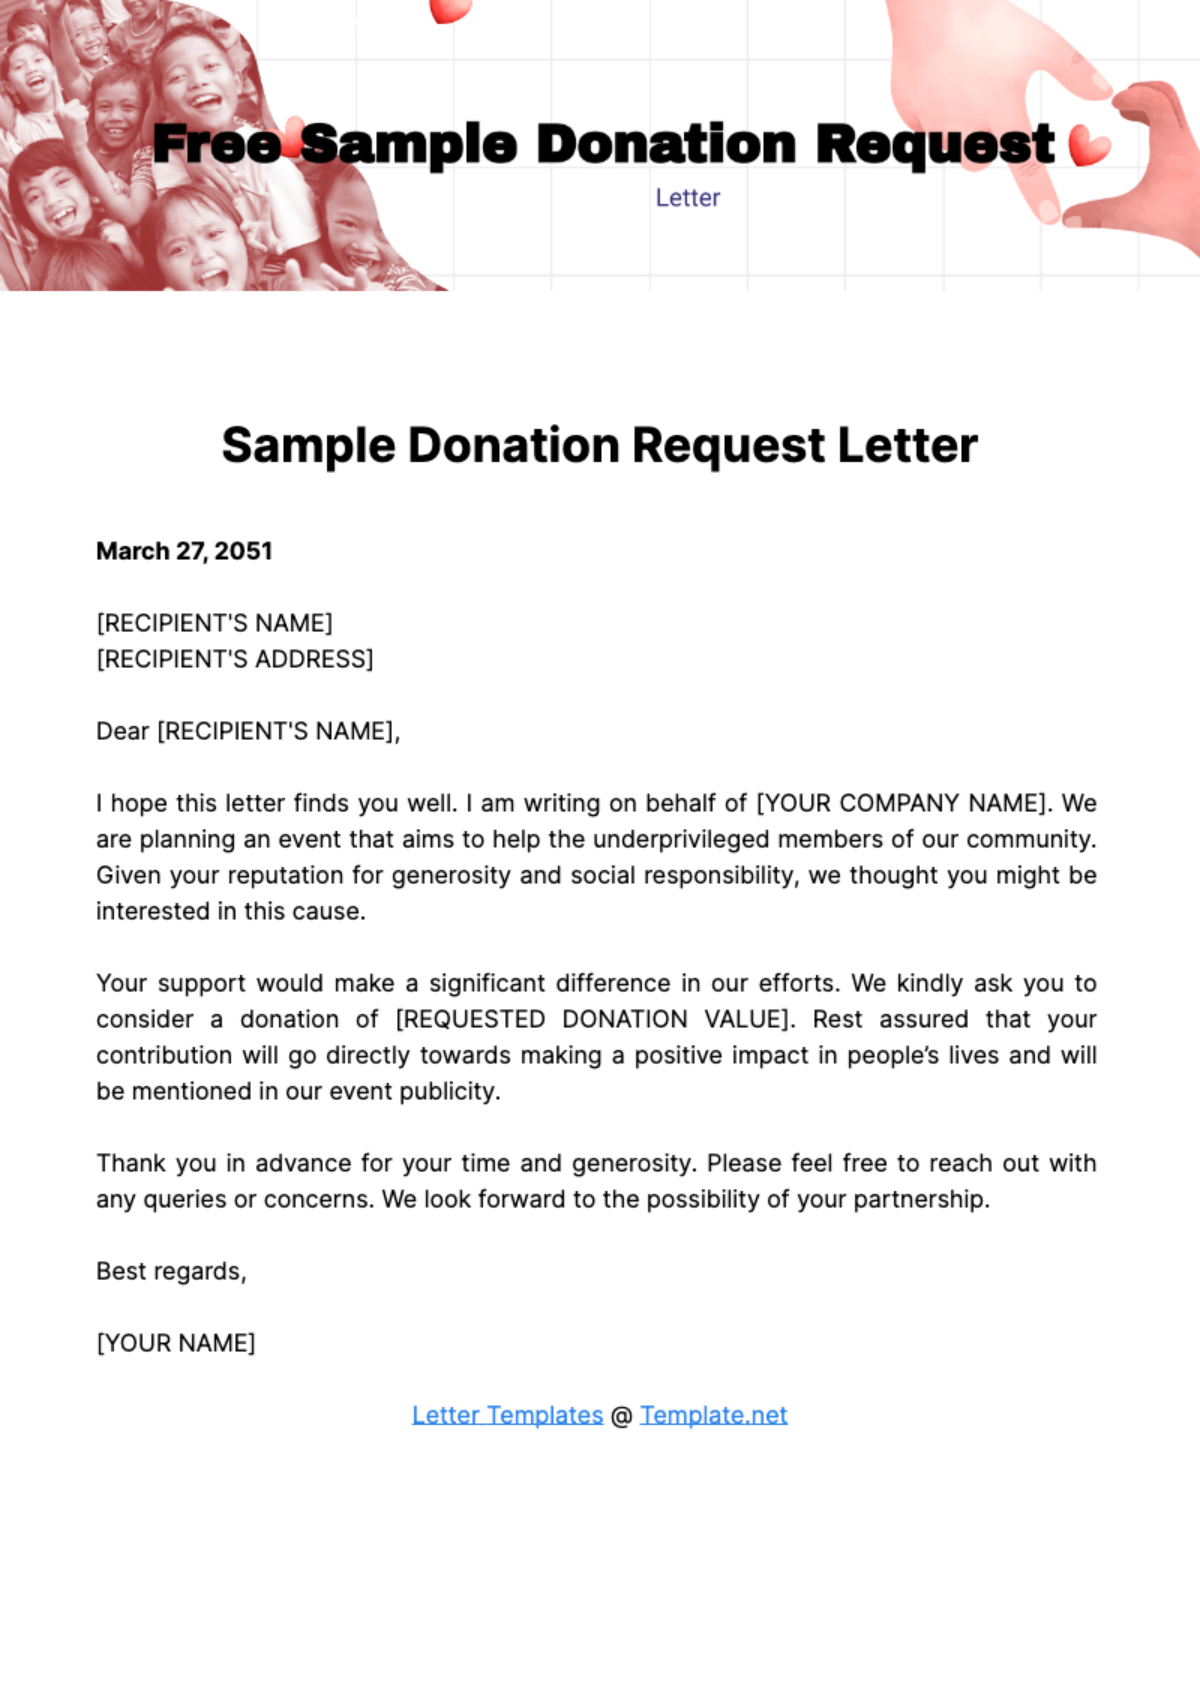 Free Sample Donation Request Letter Template